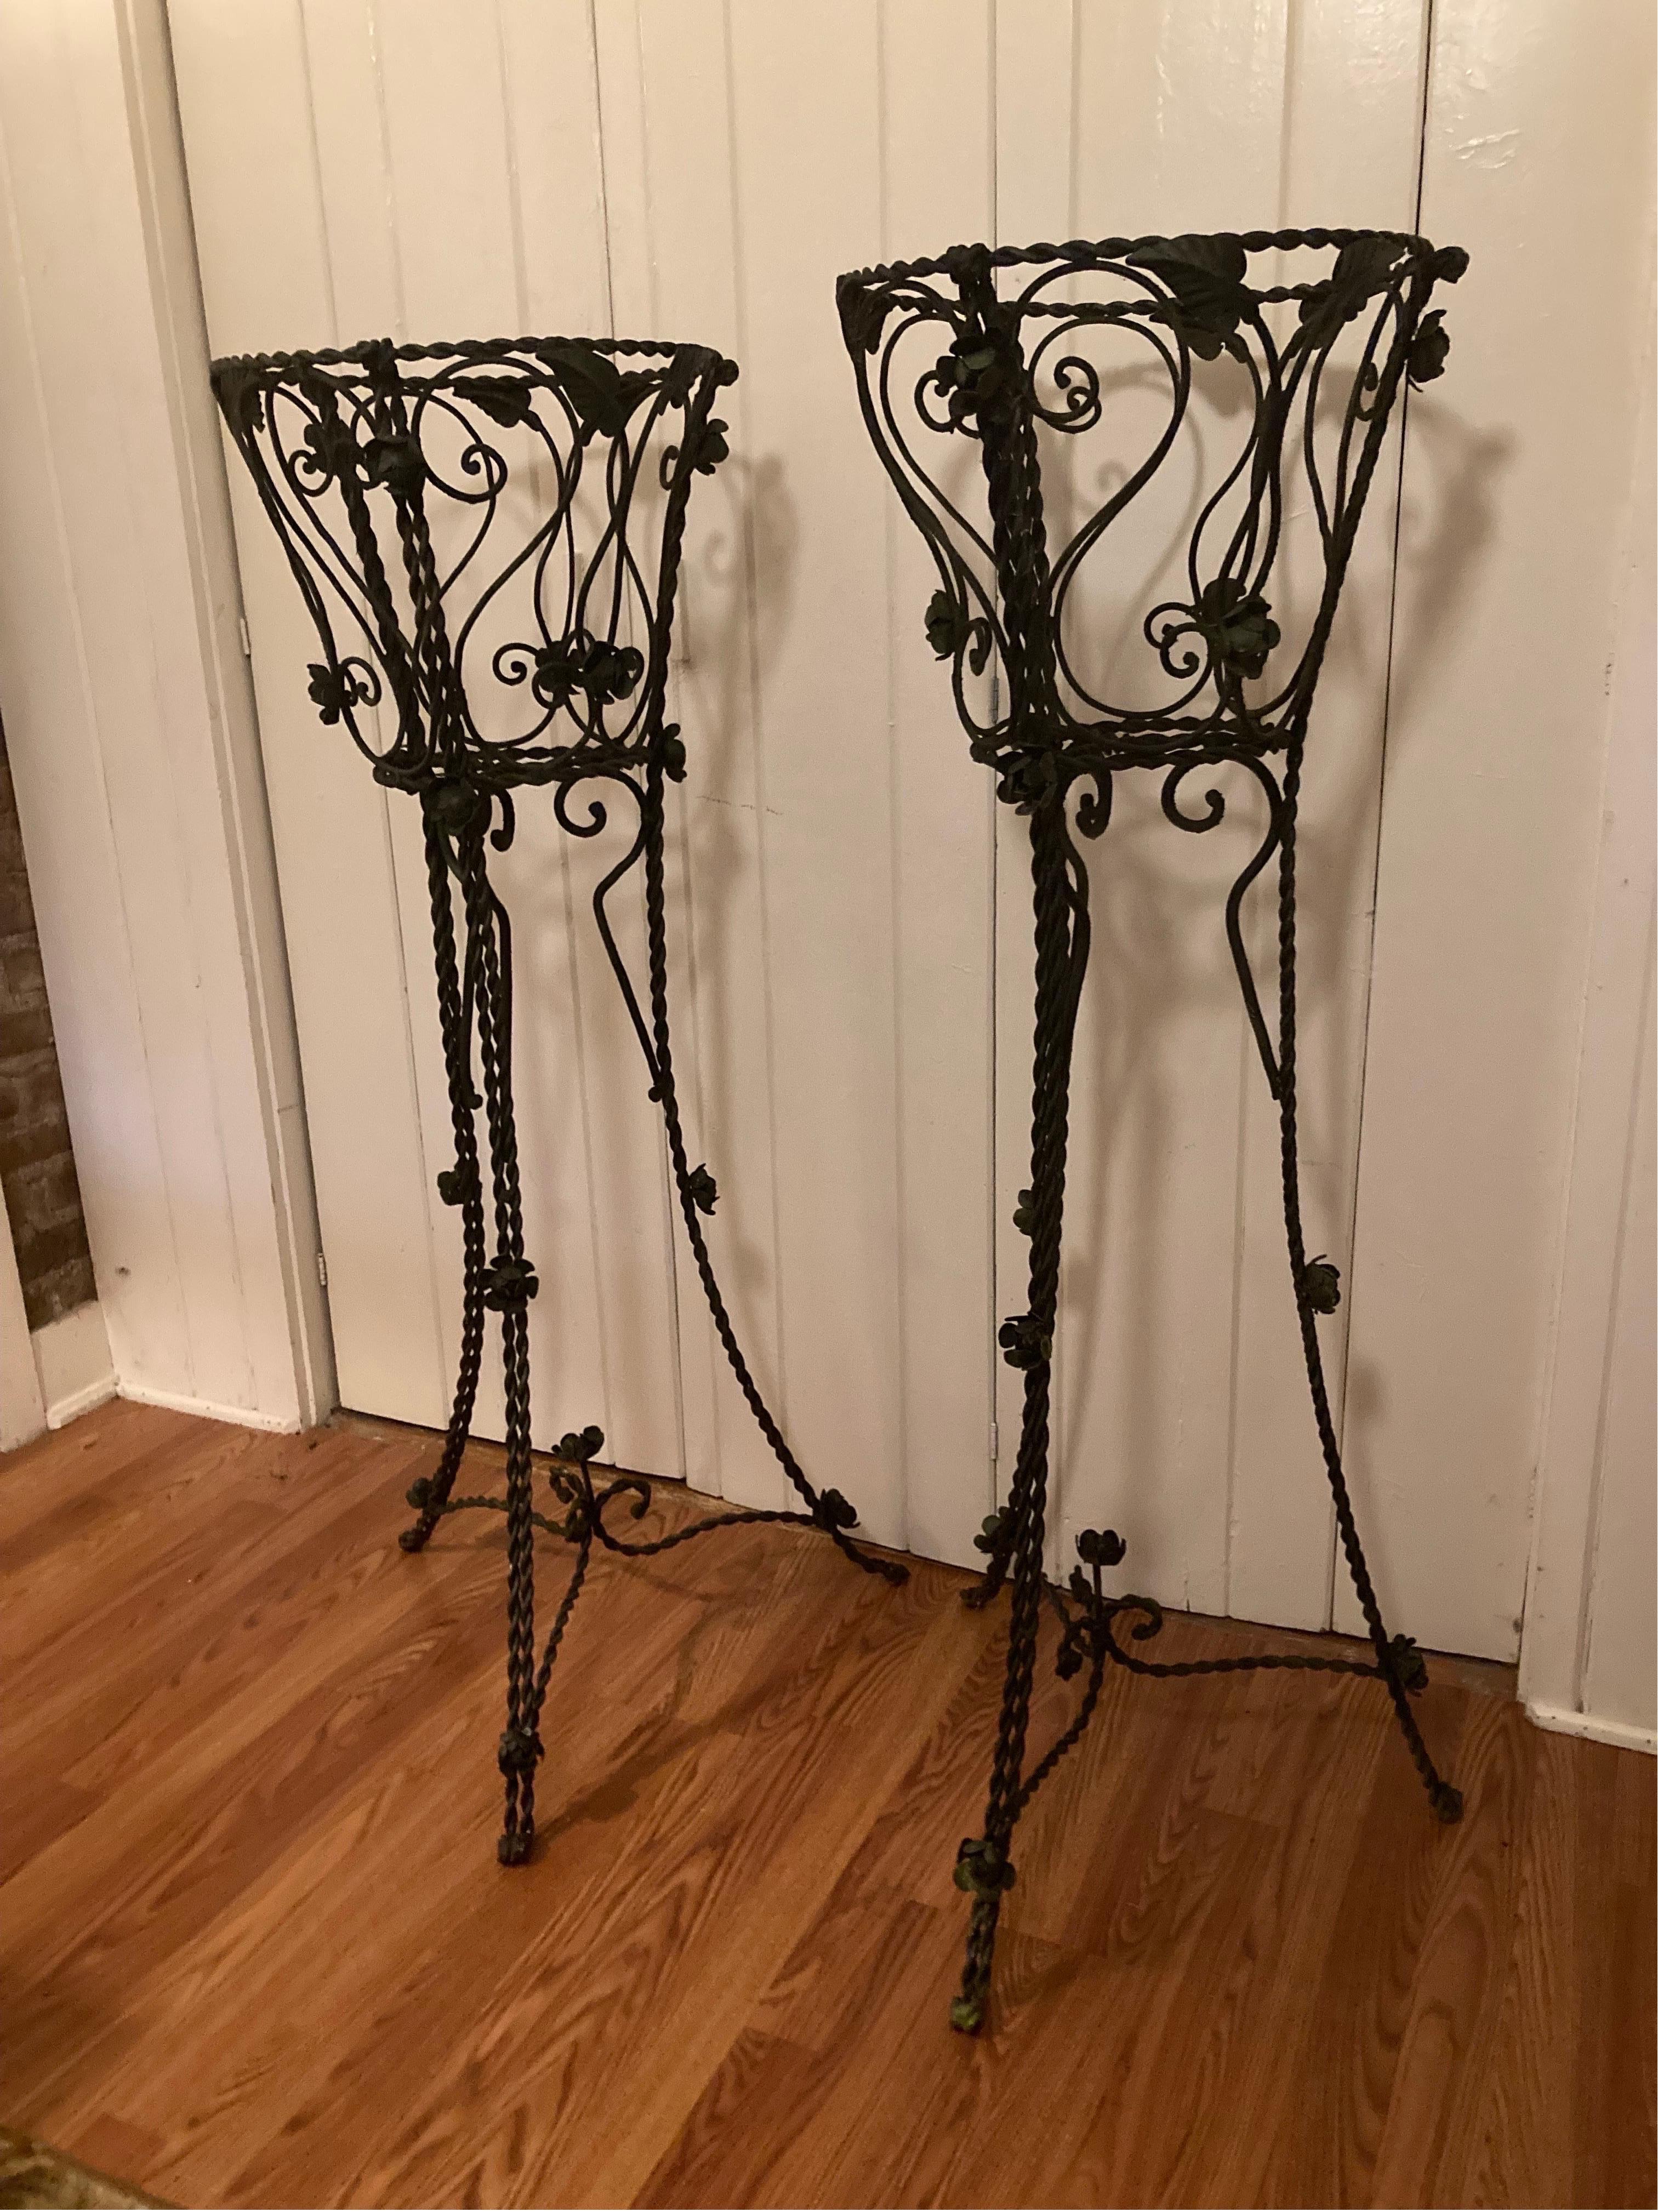 French Provincial Gothic Oversized Garden Planters - a pair For Sale